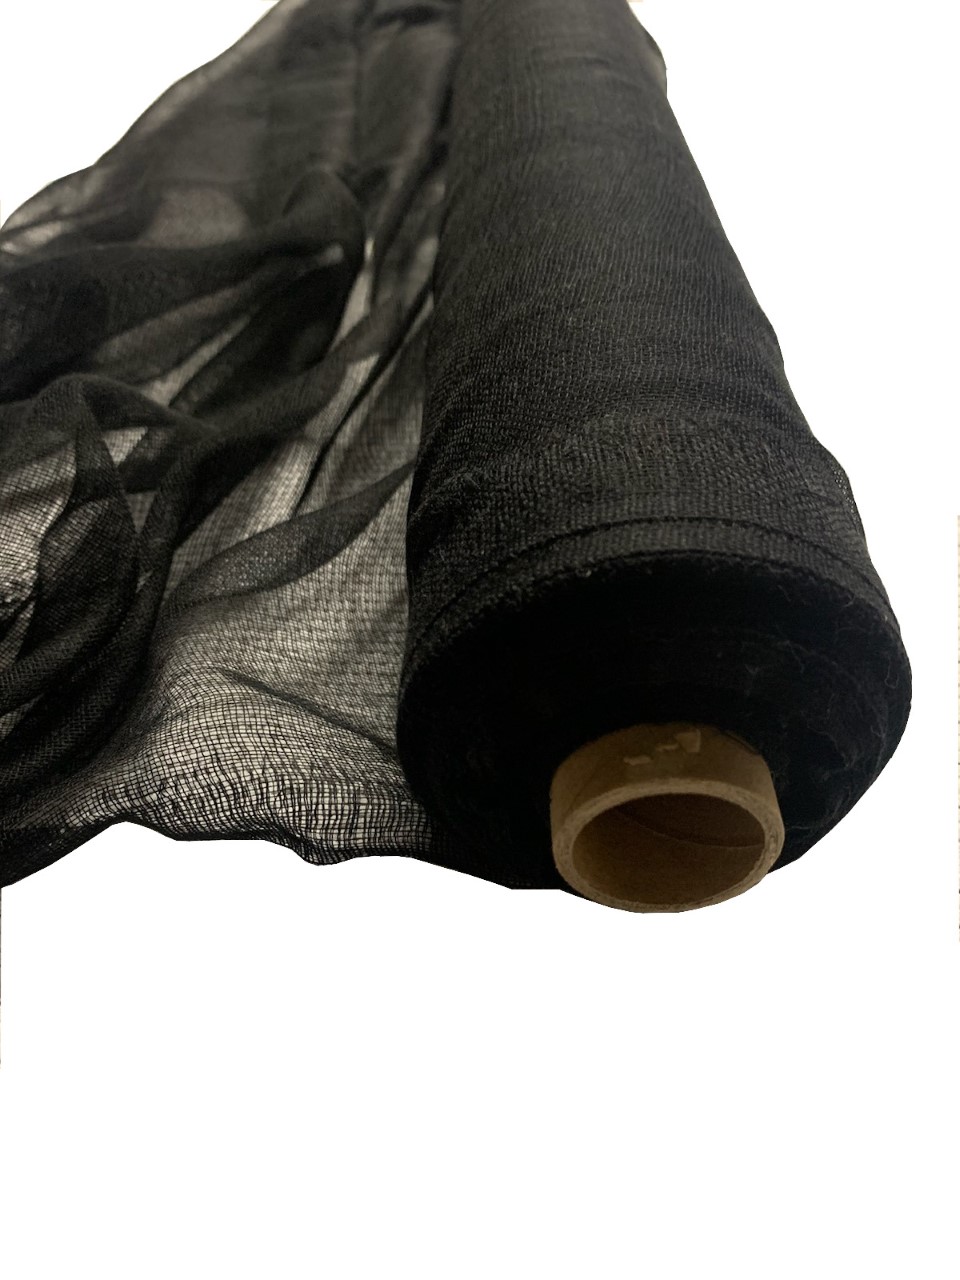 36" Wide Black Cheesecloth By The Yard - 100% Cotton